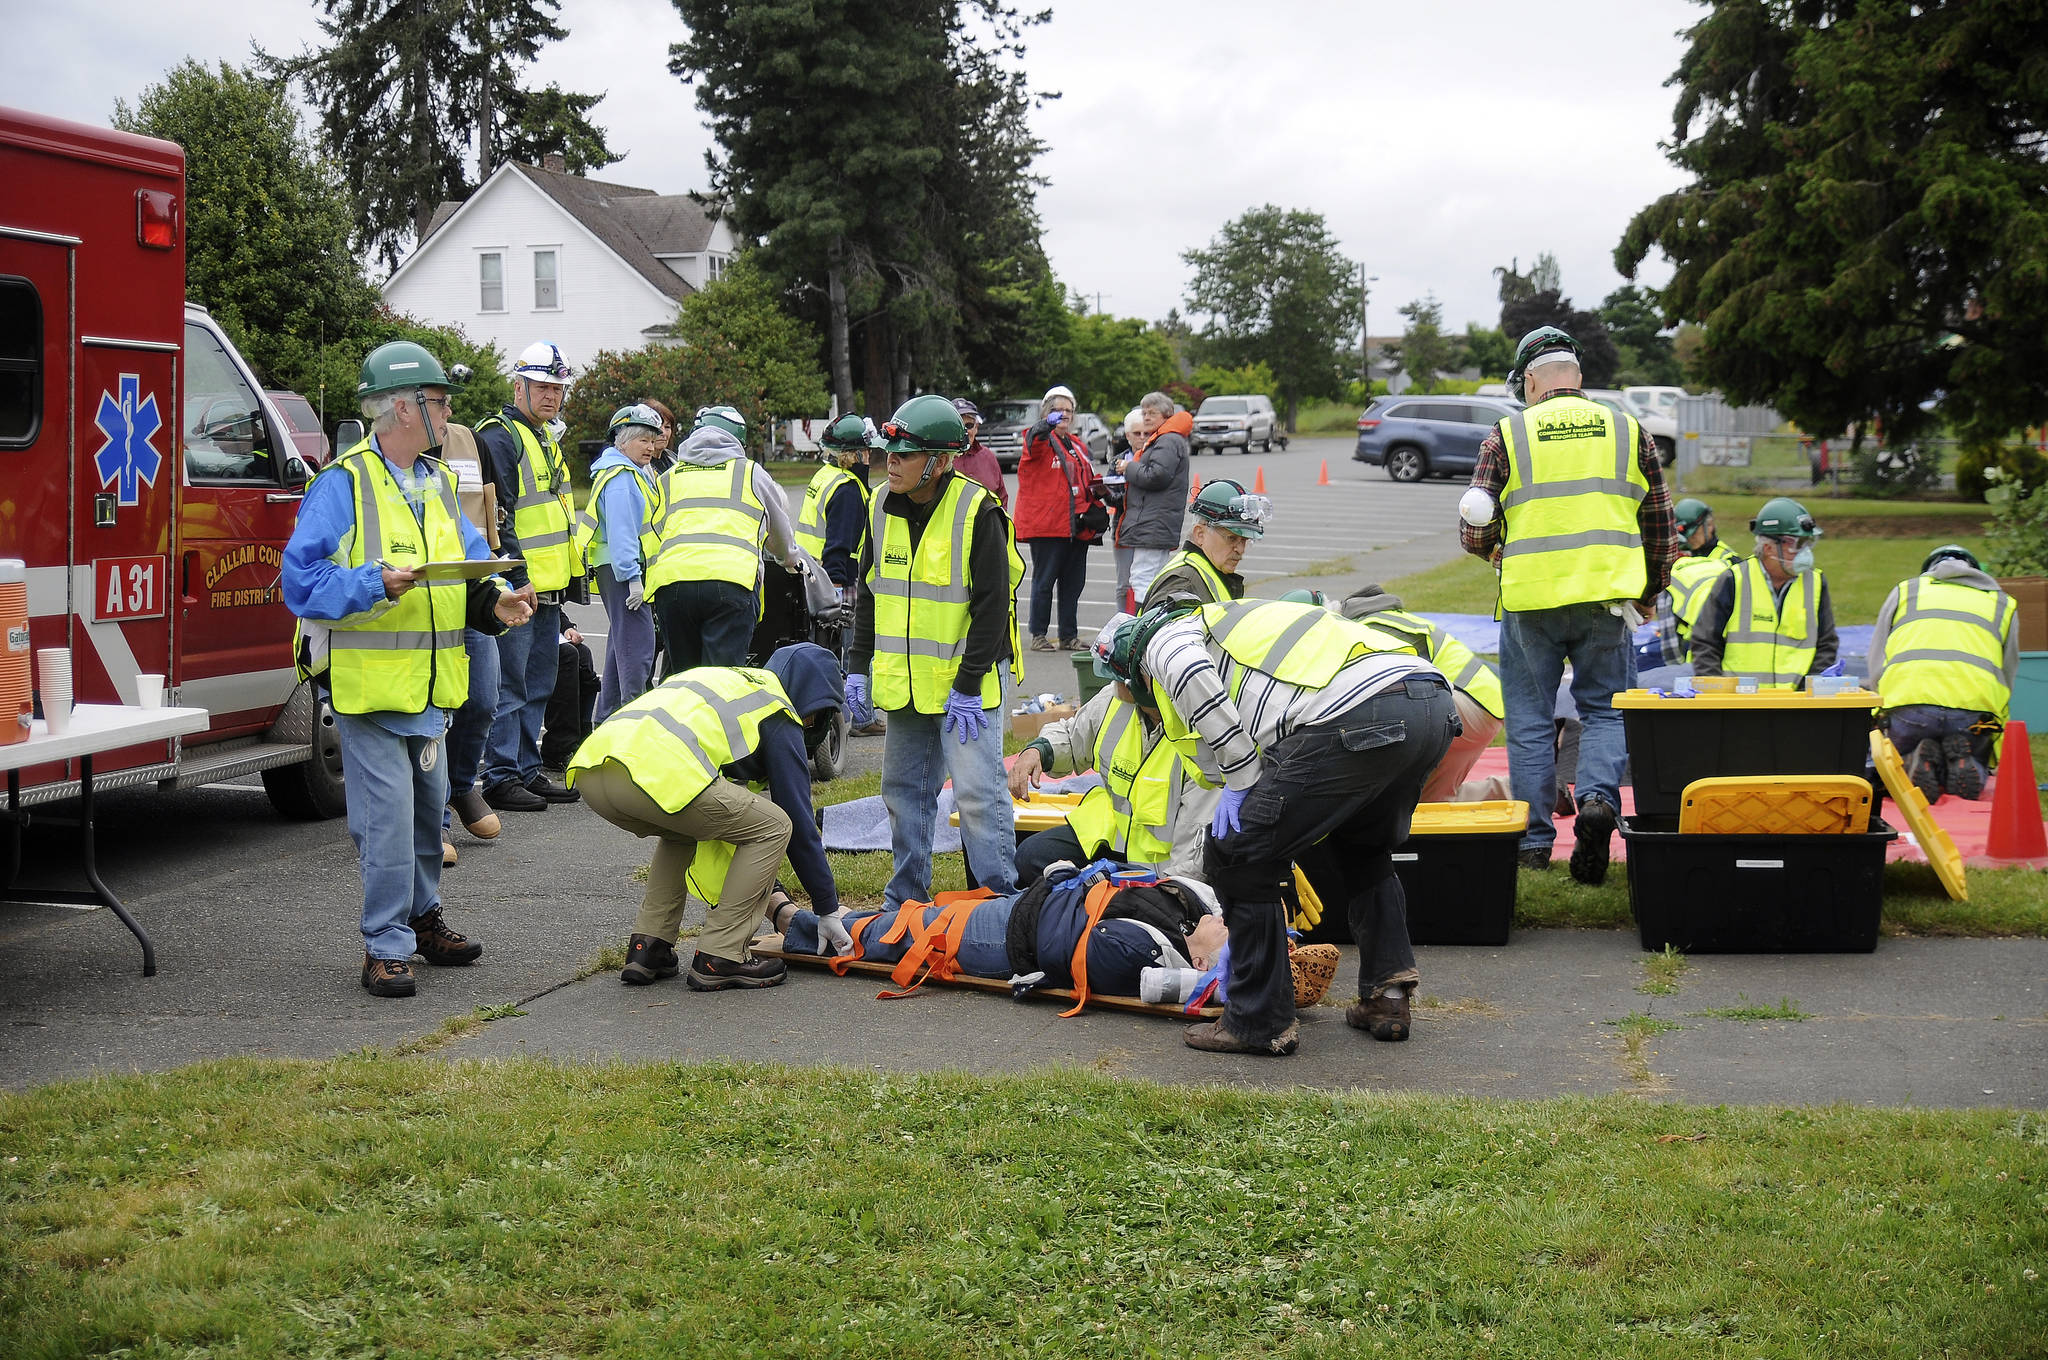 Community Emergency Response Team members treat “victims” of an earthquake during Saturday’s drill. (Michael Dashiell/Olympic Peninsula News Group)